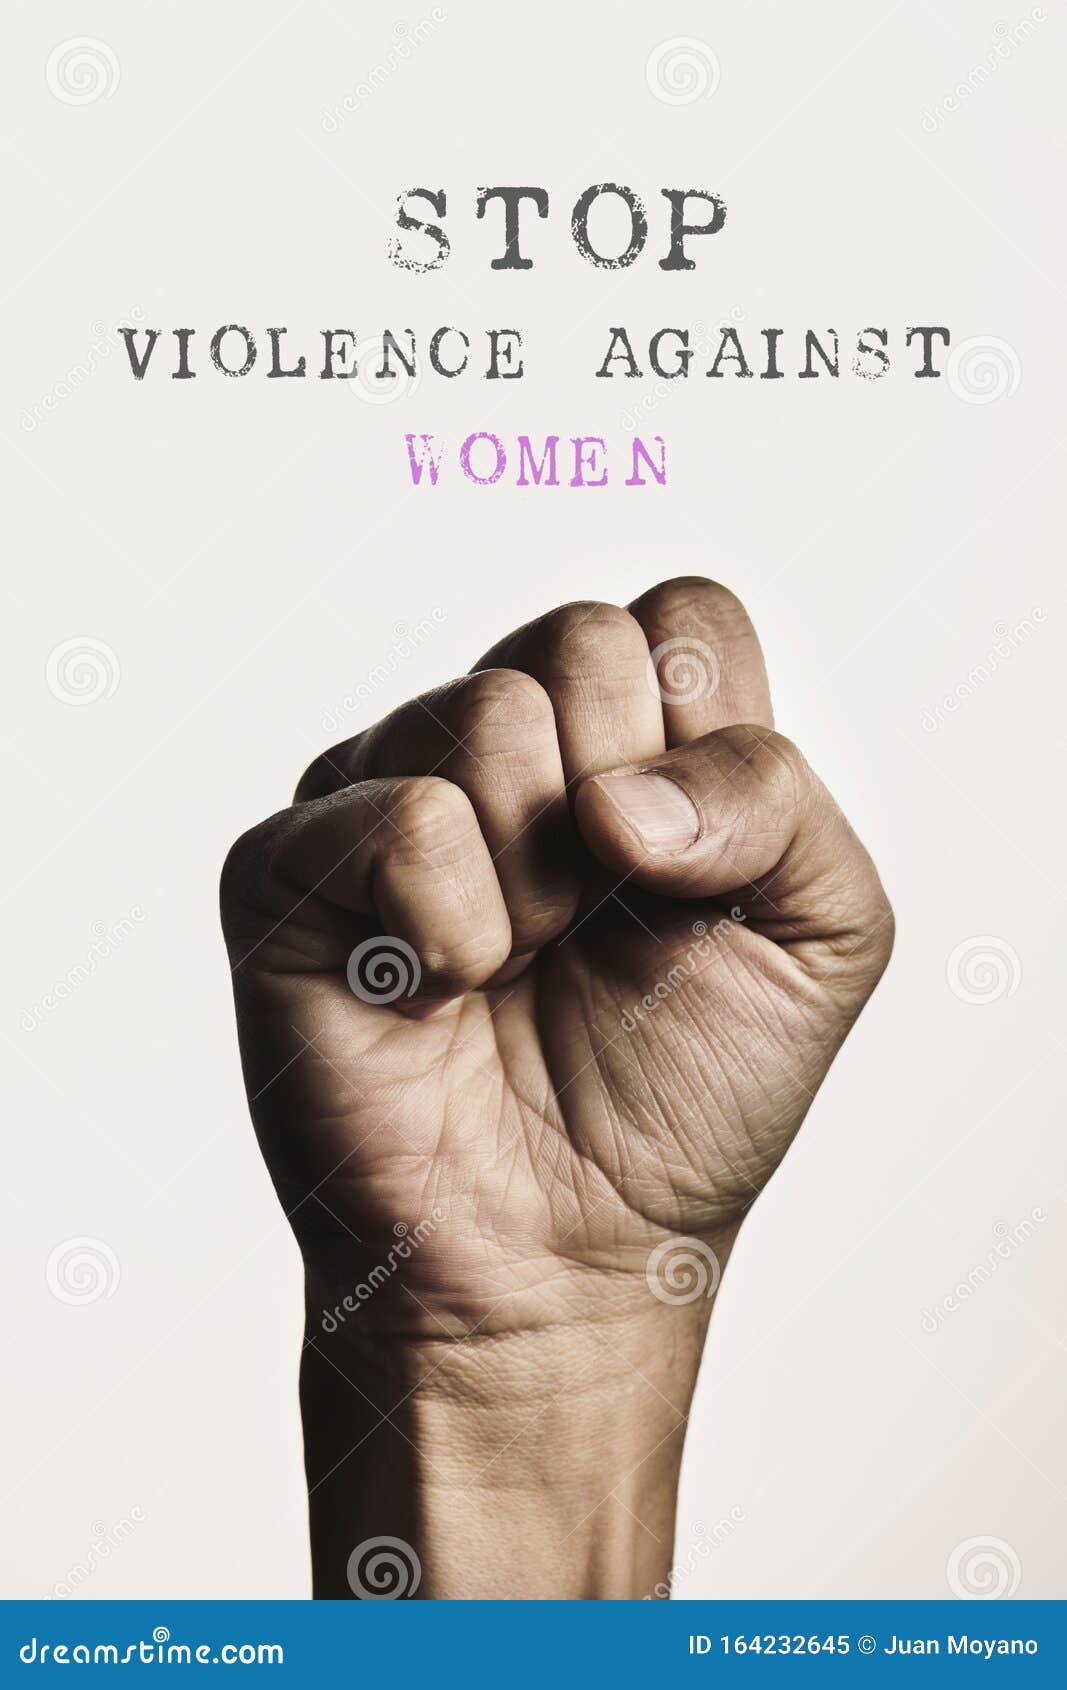 fist and text stop violence against women